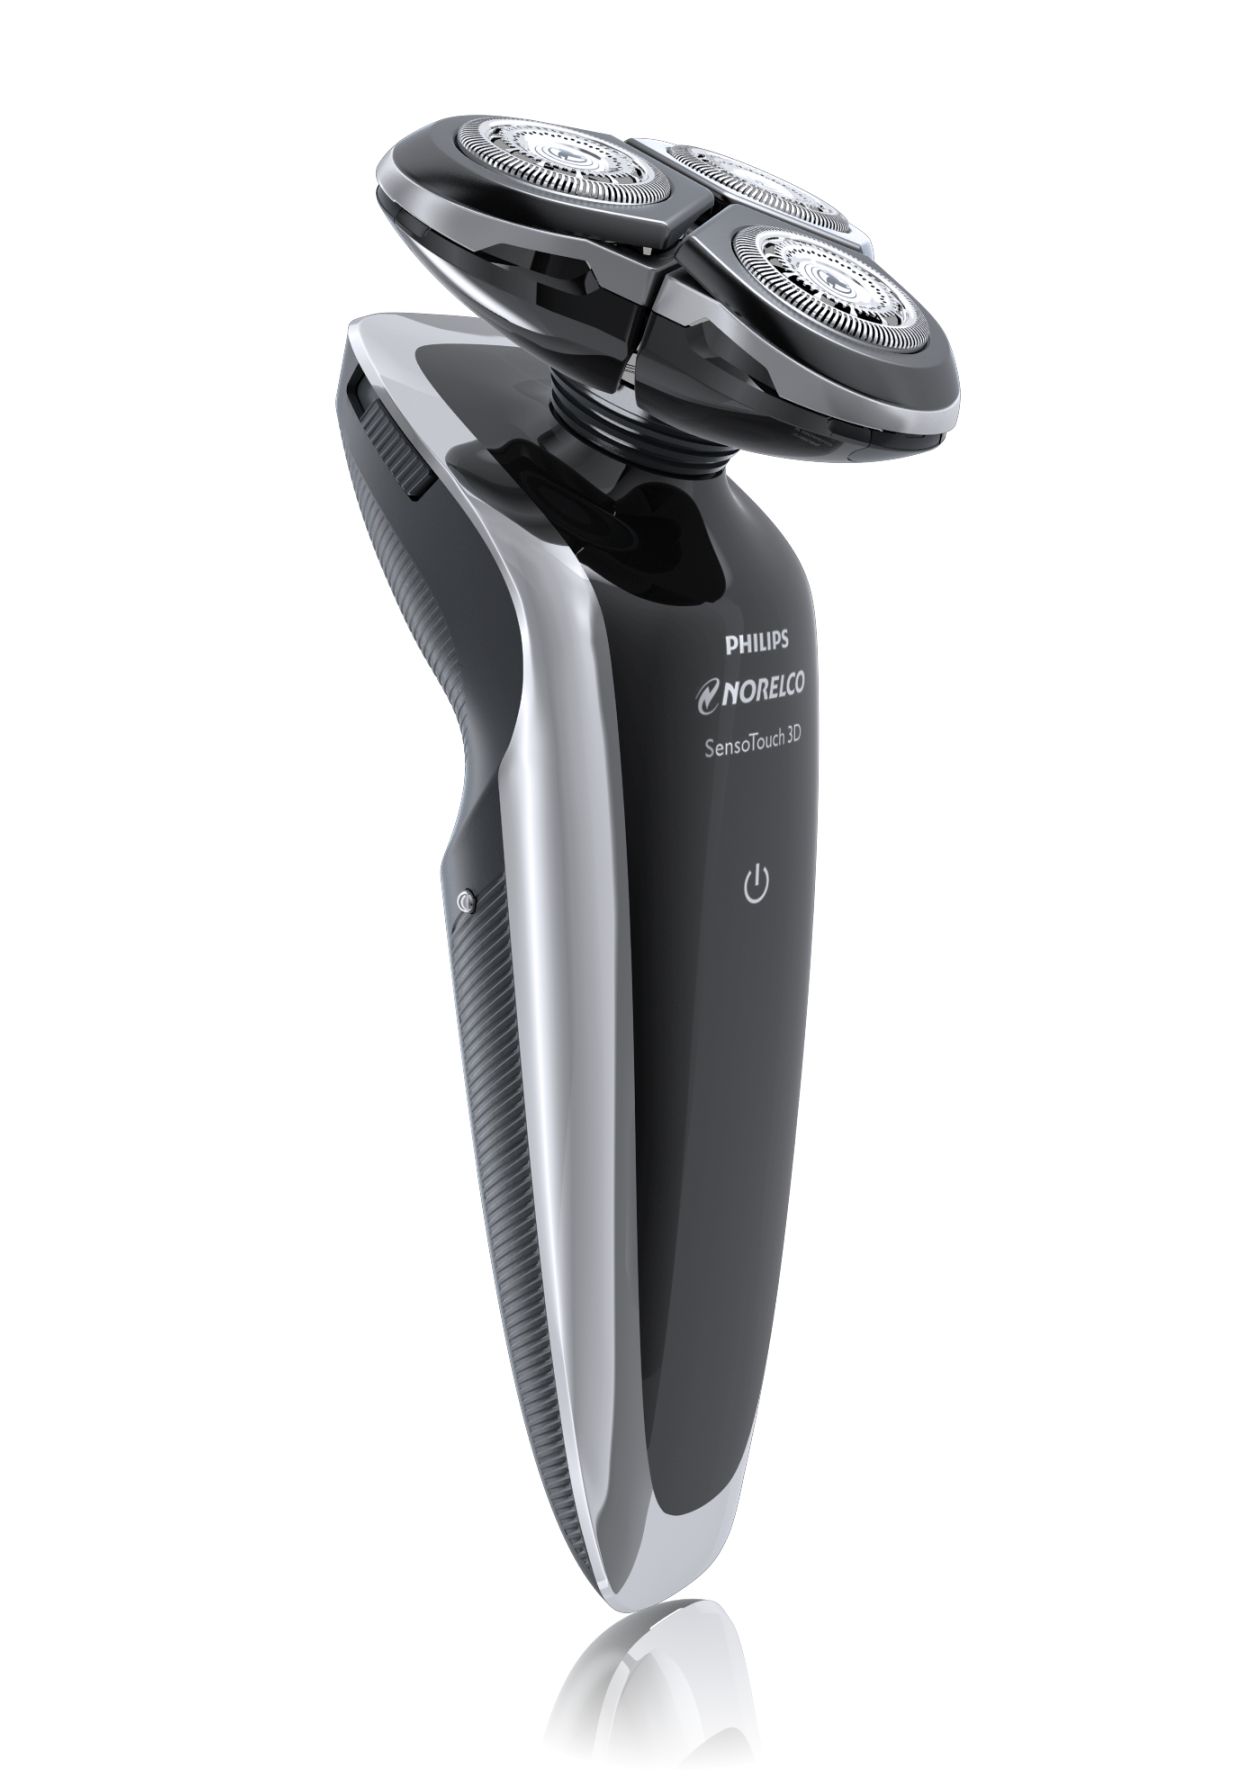 shaving products for electric shavers